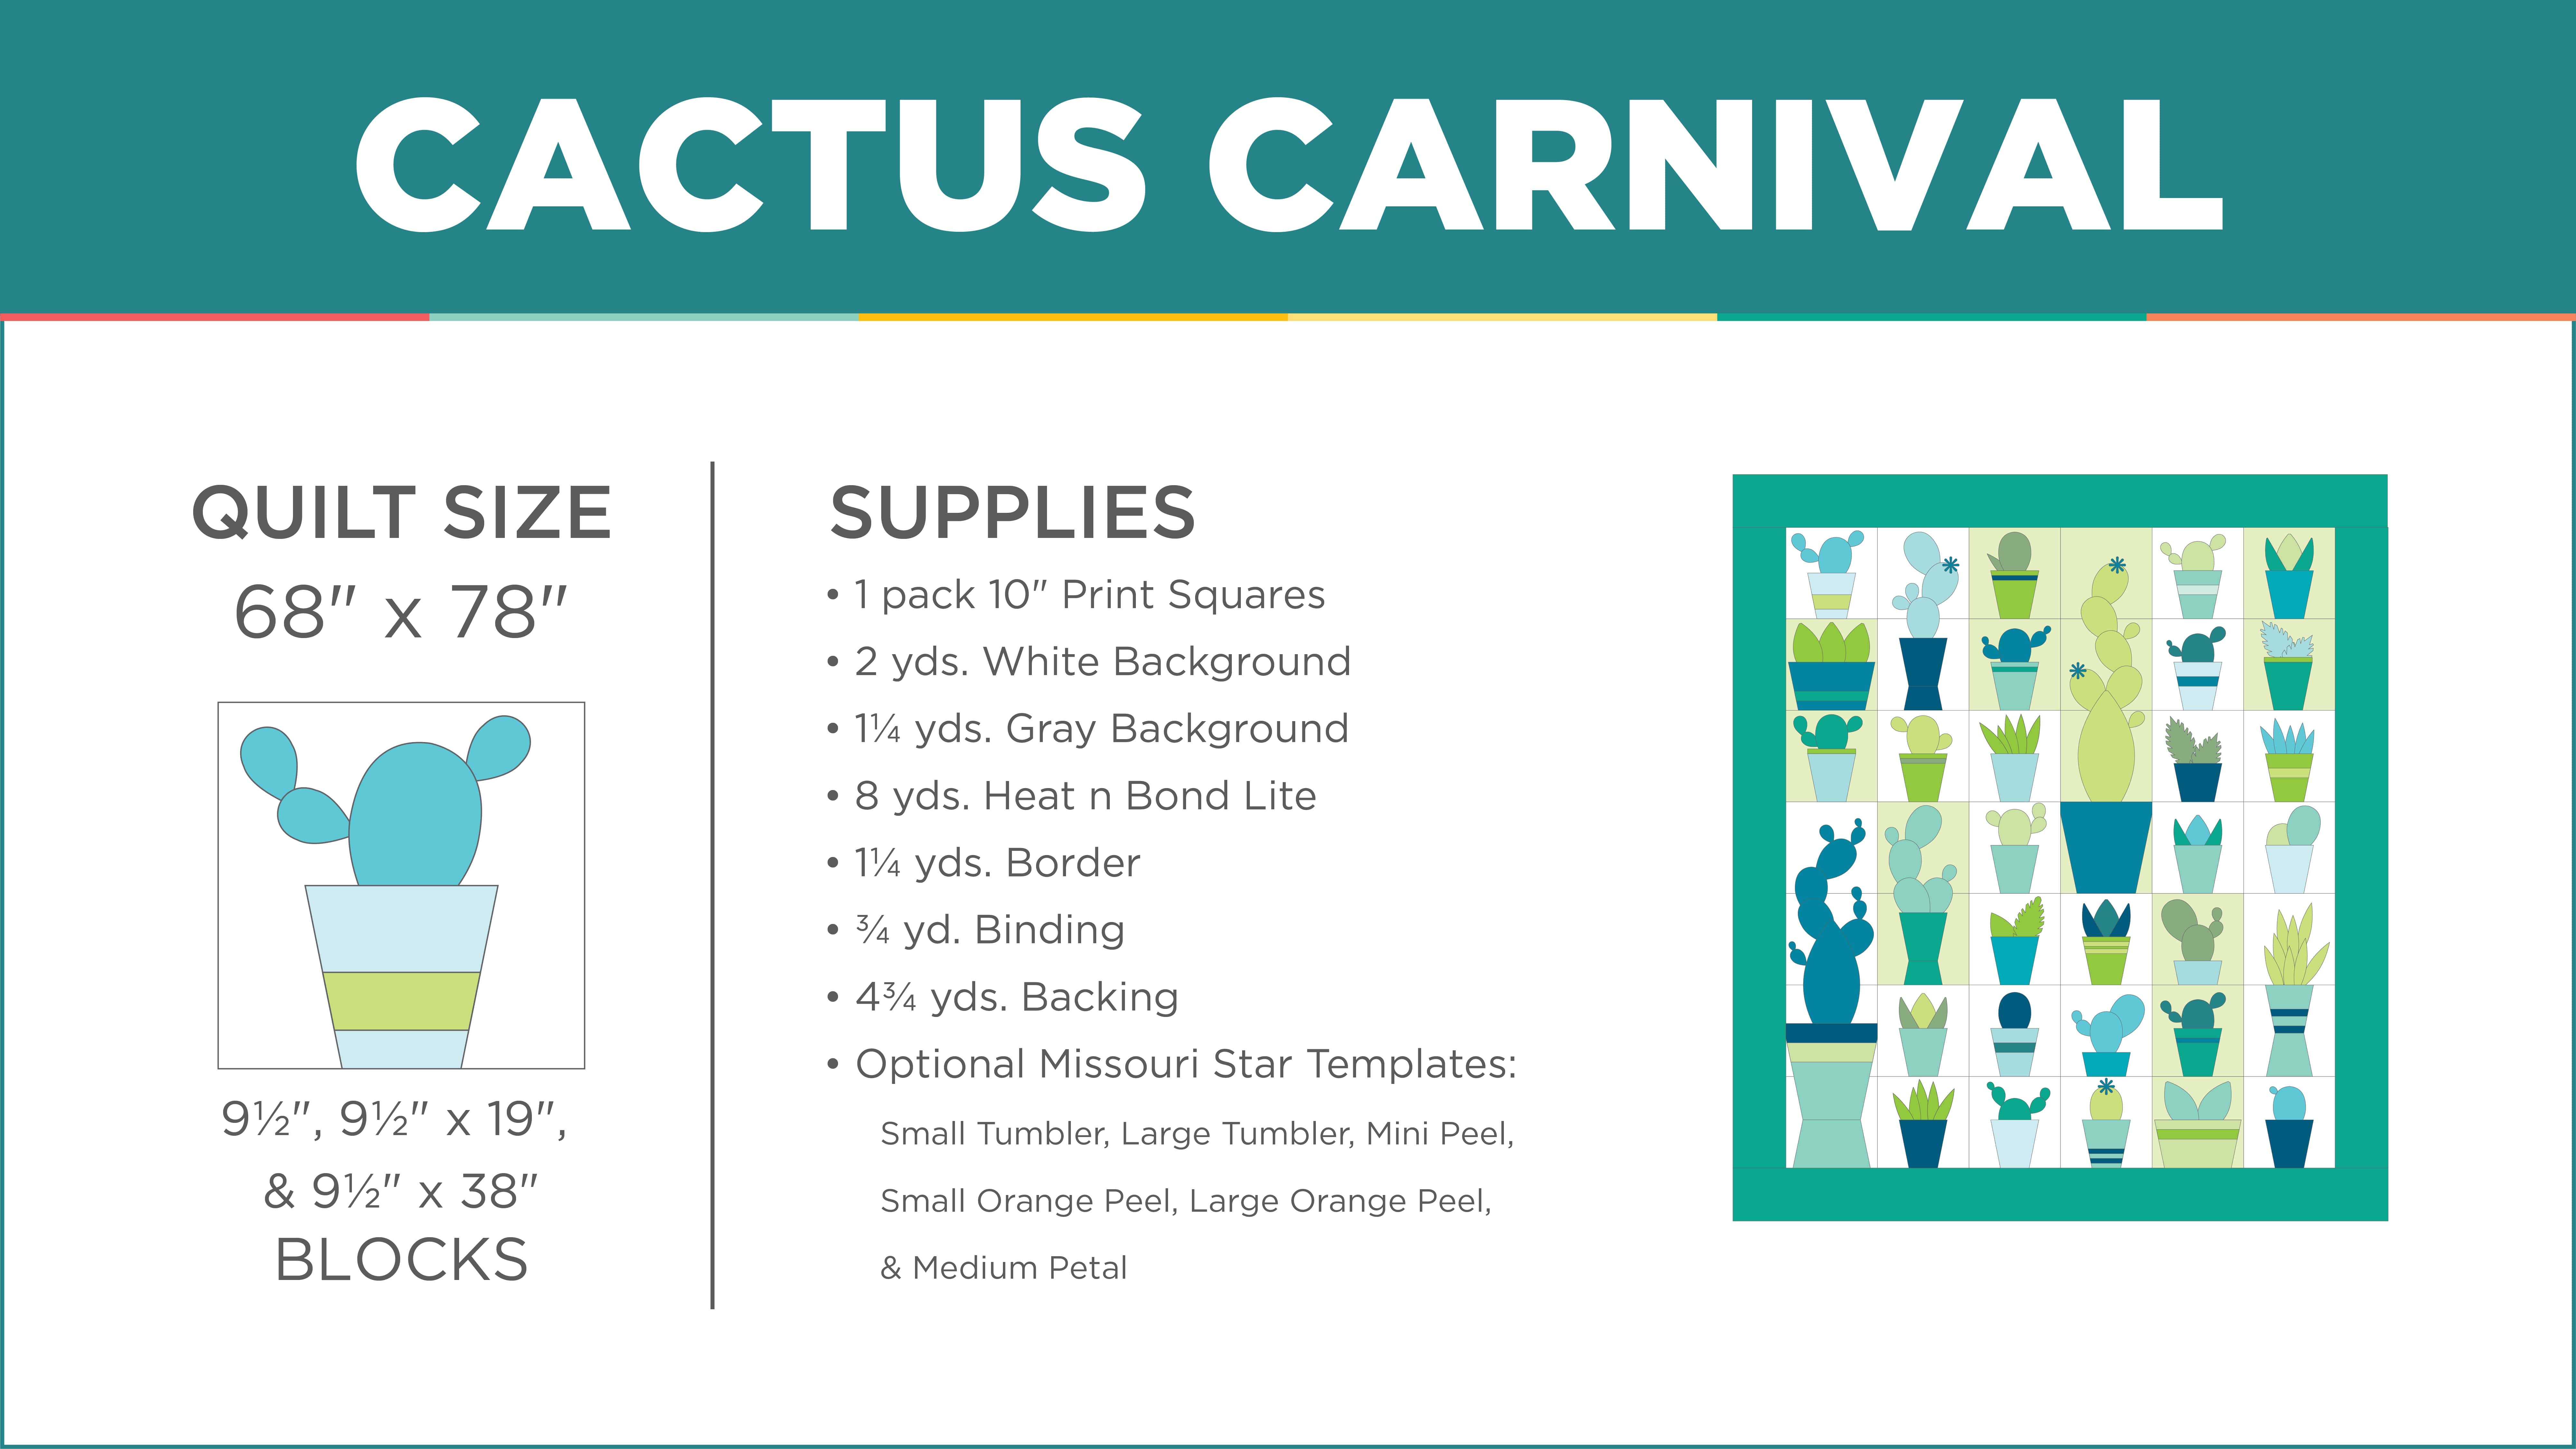 The Cactus Carnival Quilt from the Missouri Star Quilt Company.